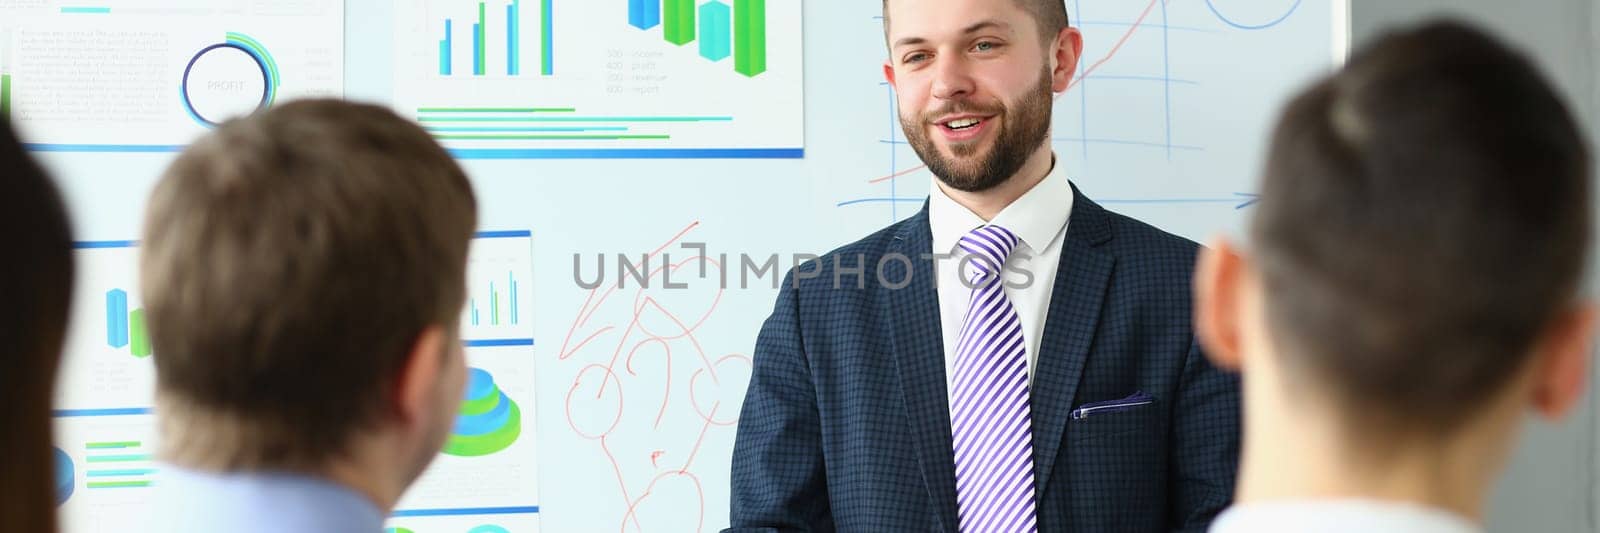 Male business coach speaker in suit makes presentation on white board by kuprevich